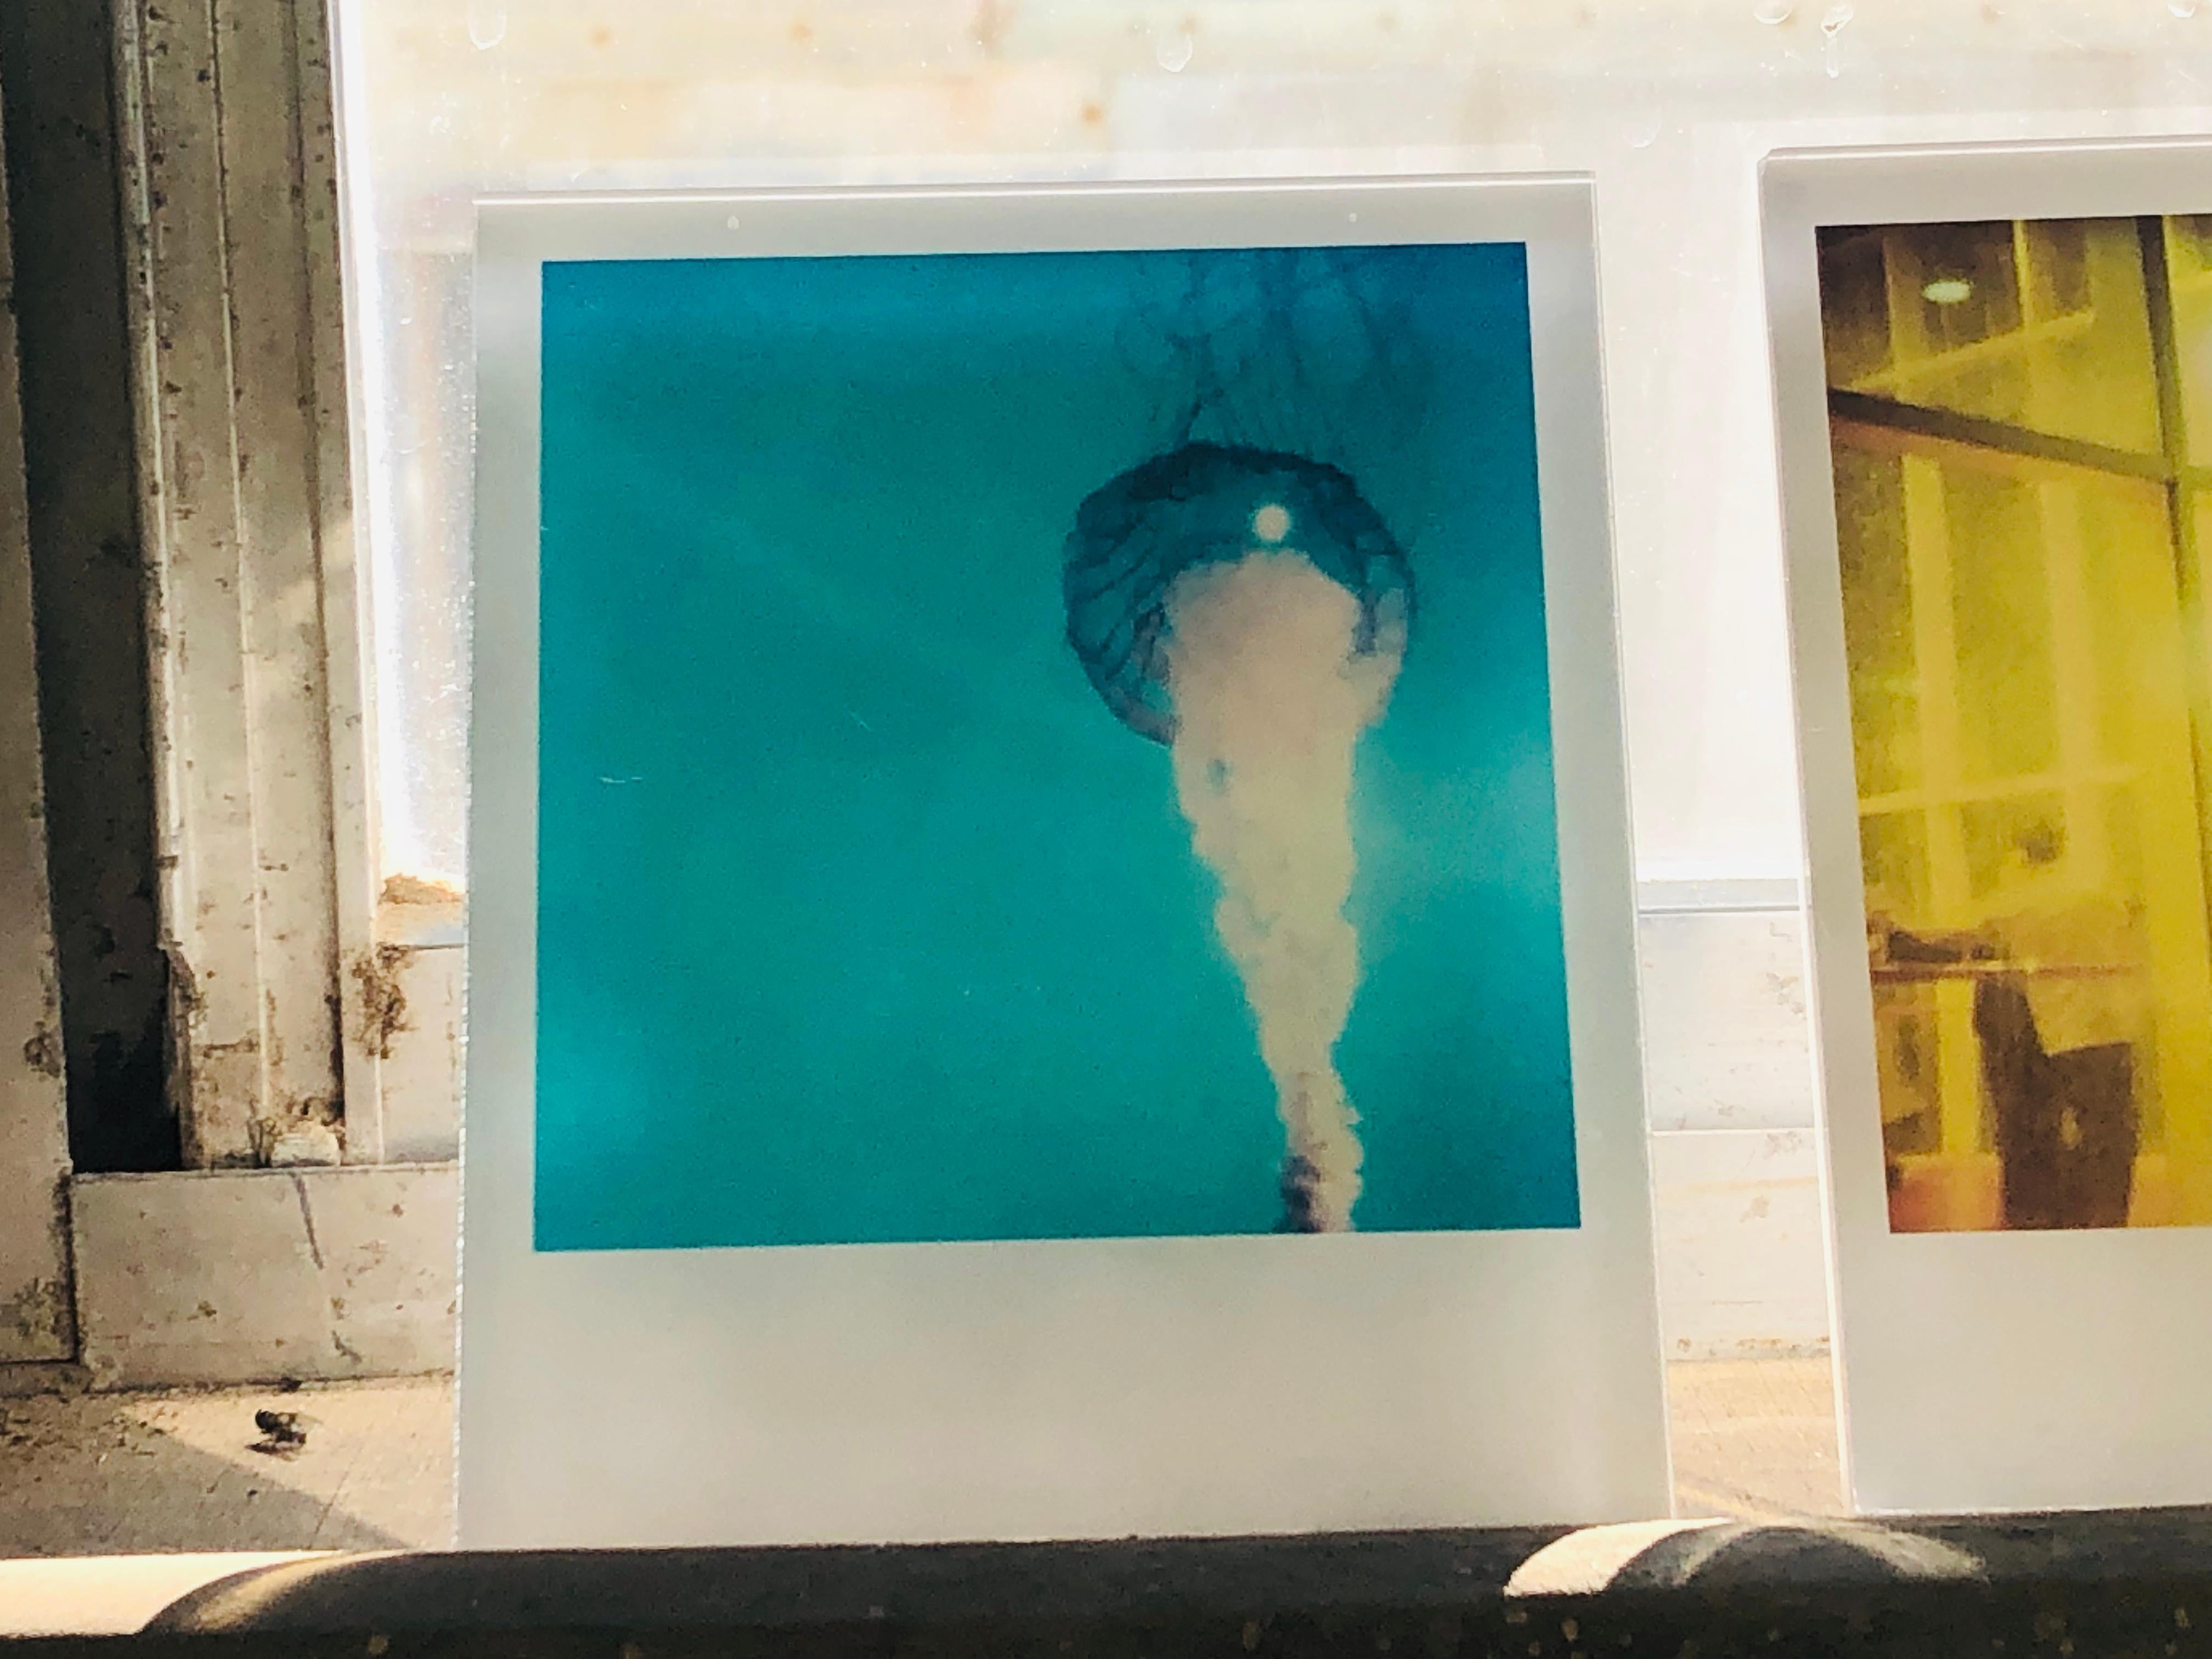 Stefanie Schneider's Minis

'Jelly Fish" (Stay), 2006
signed and signature brand on verso
Lambda digital Color Photographs based on a Polaroid

from the movie 'Stay' by Marc Forster, featuring Ewan McGregor and Naomi Watts.

Polaroid sized open